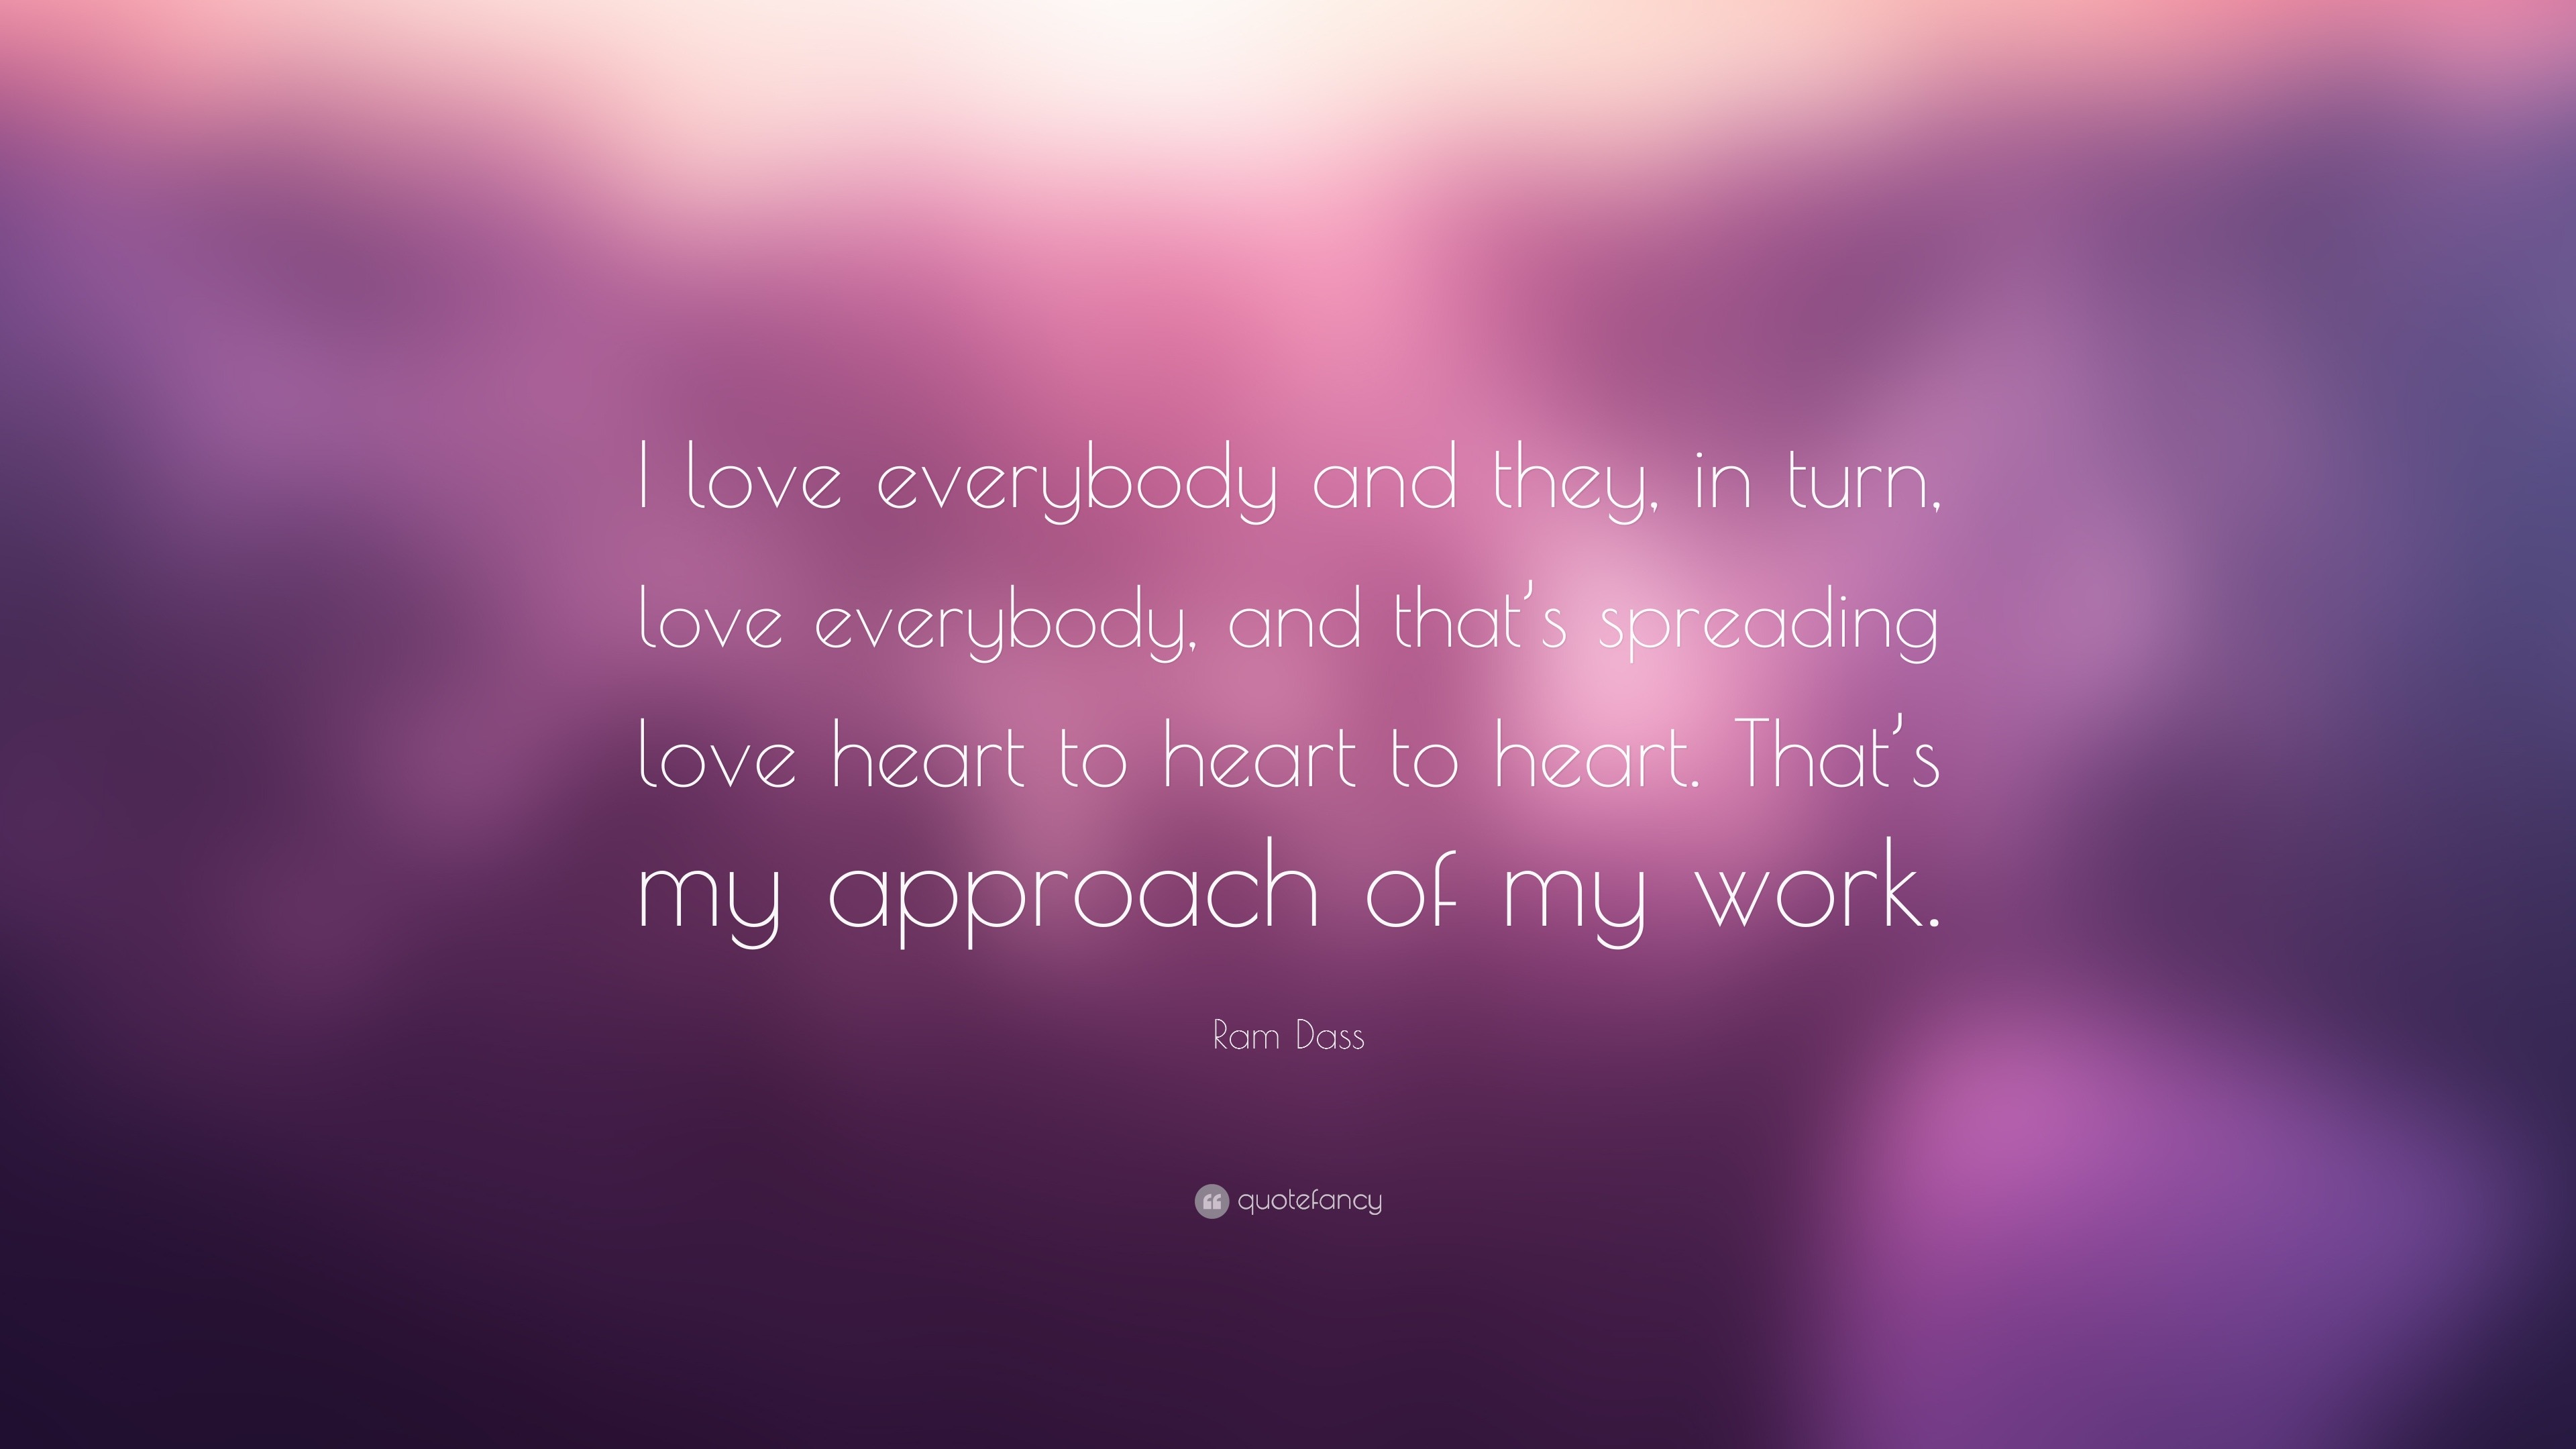 Ram Dass Quote “I love everybody and they in turn love everybody